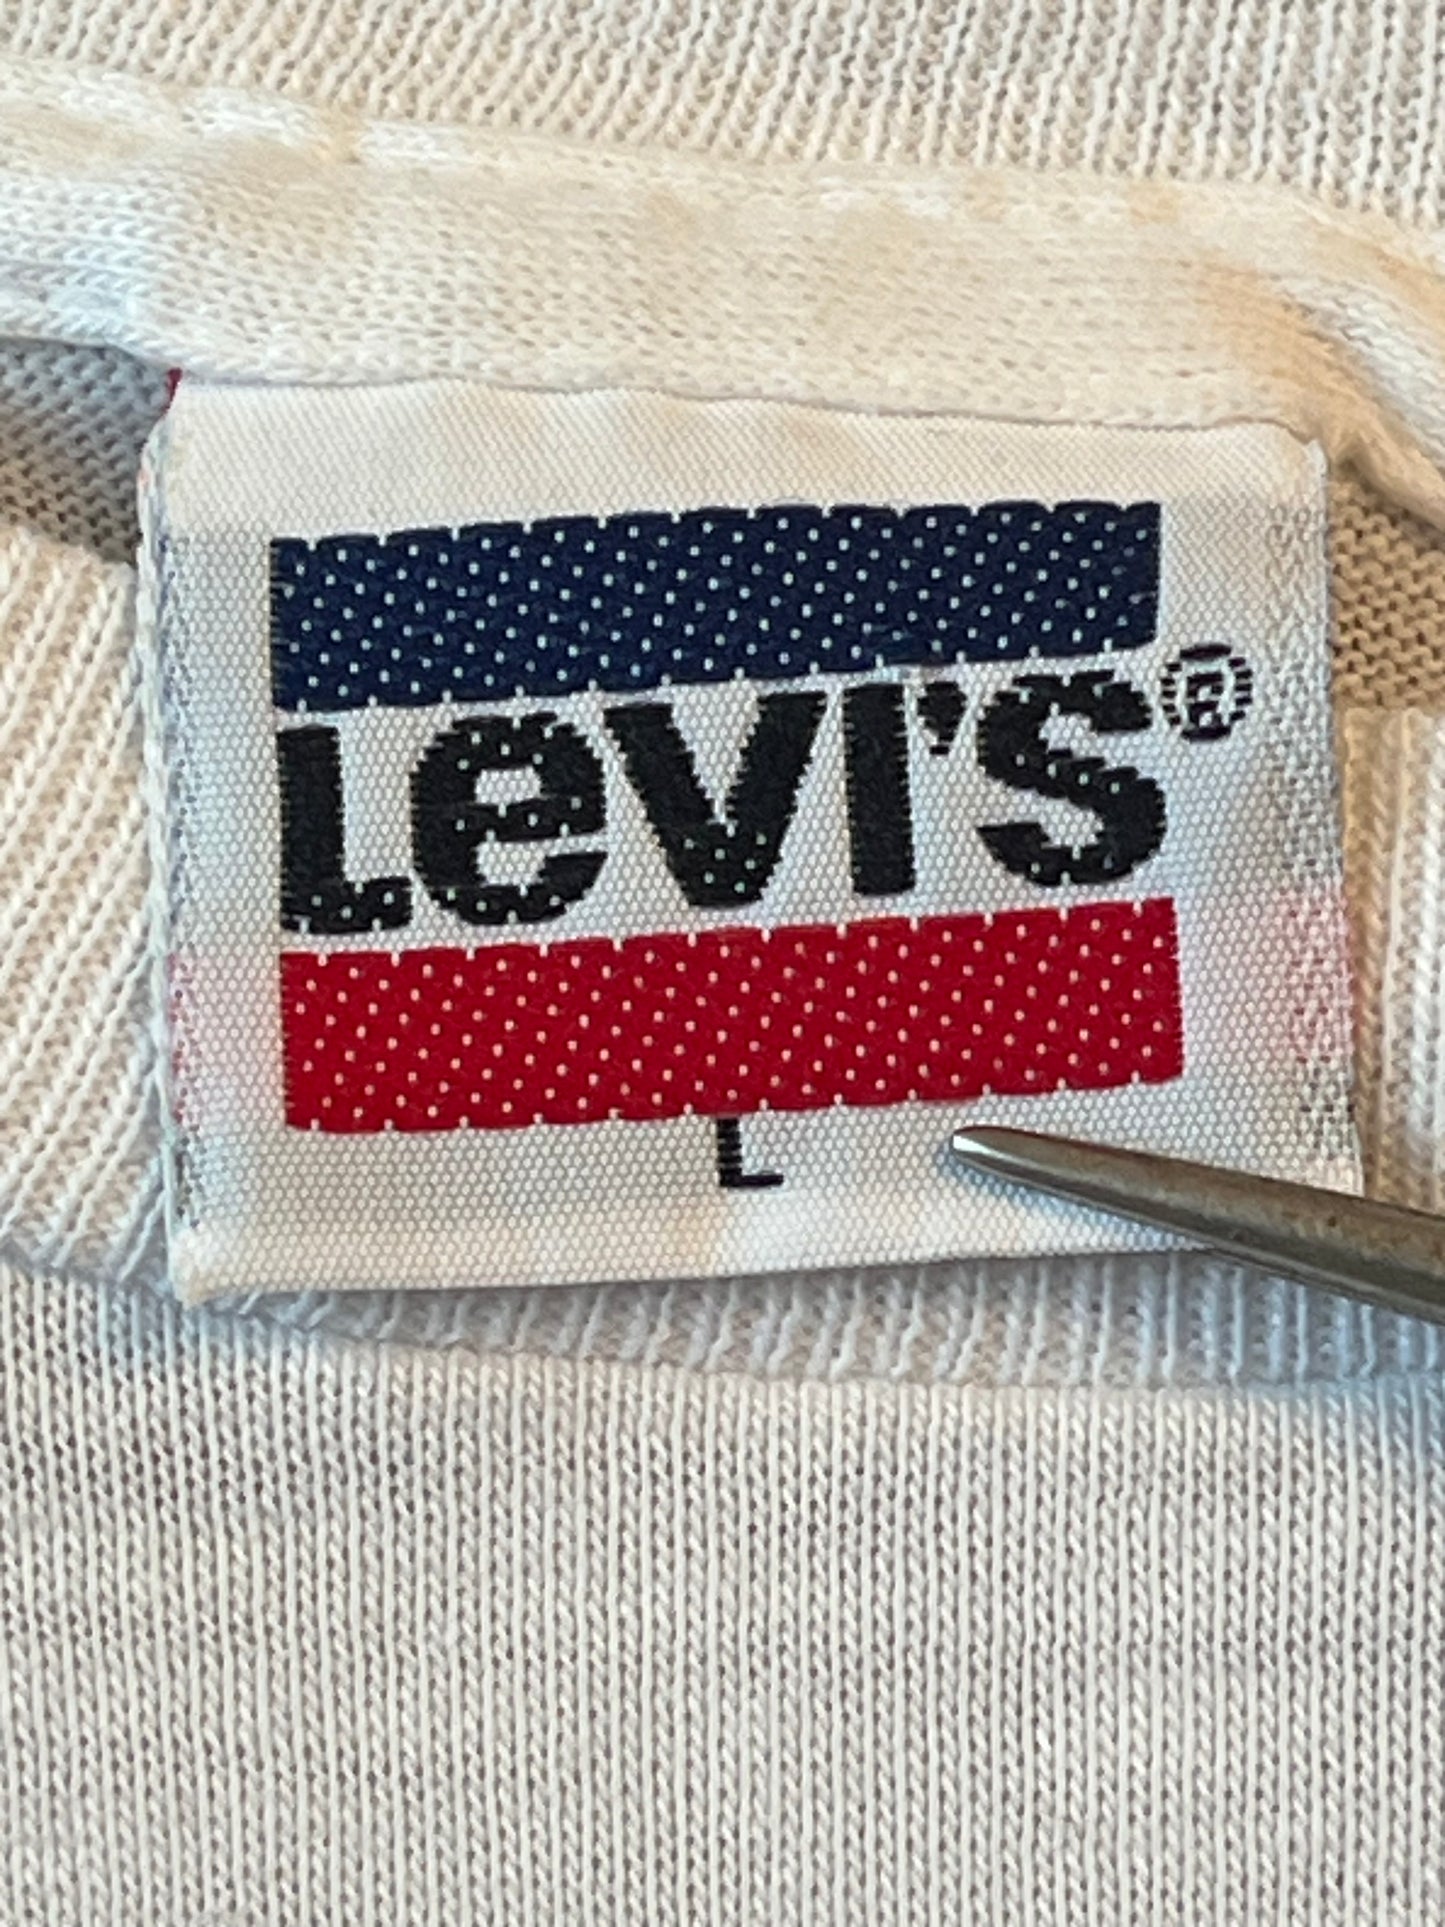 Levi's L.A Olympics Committee 1984